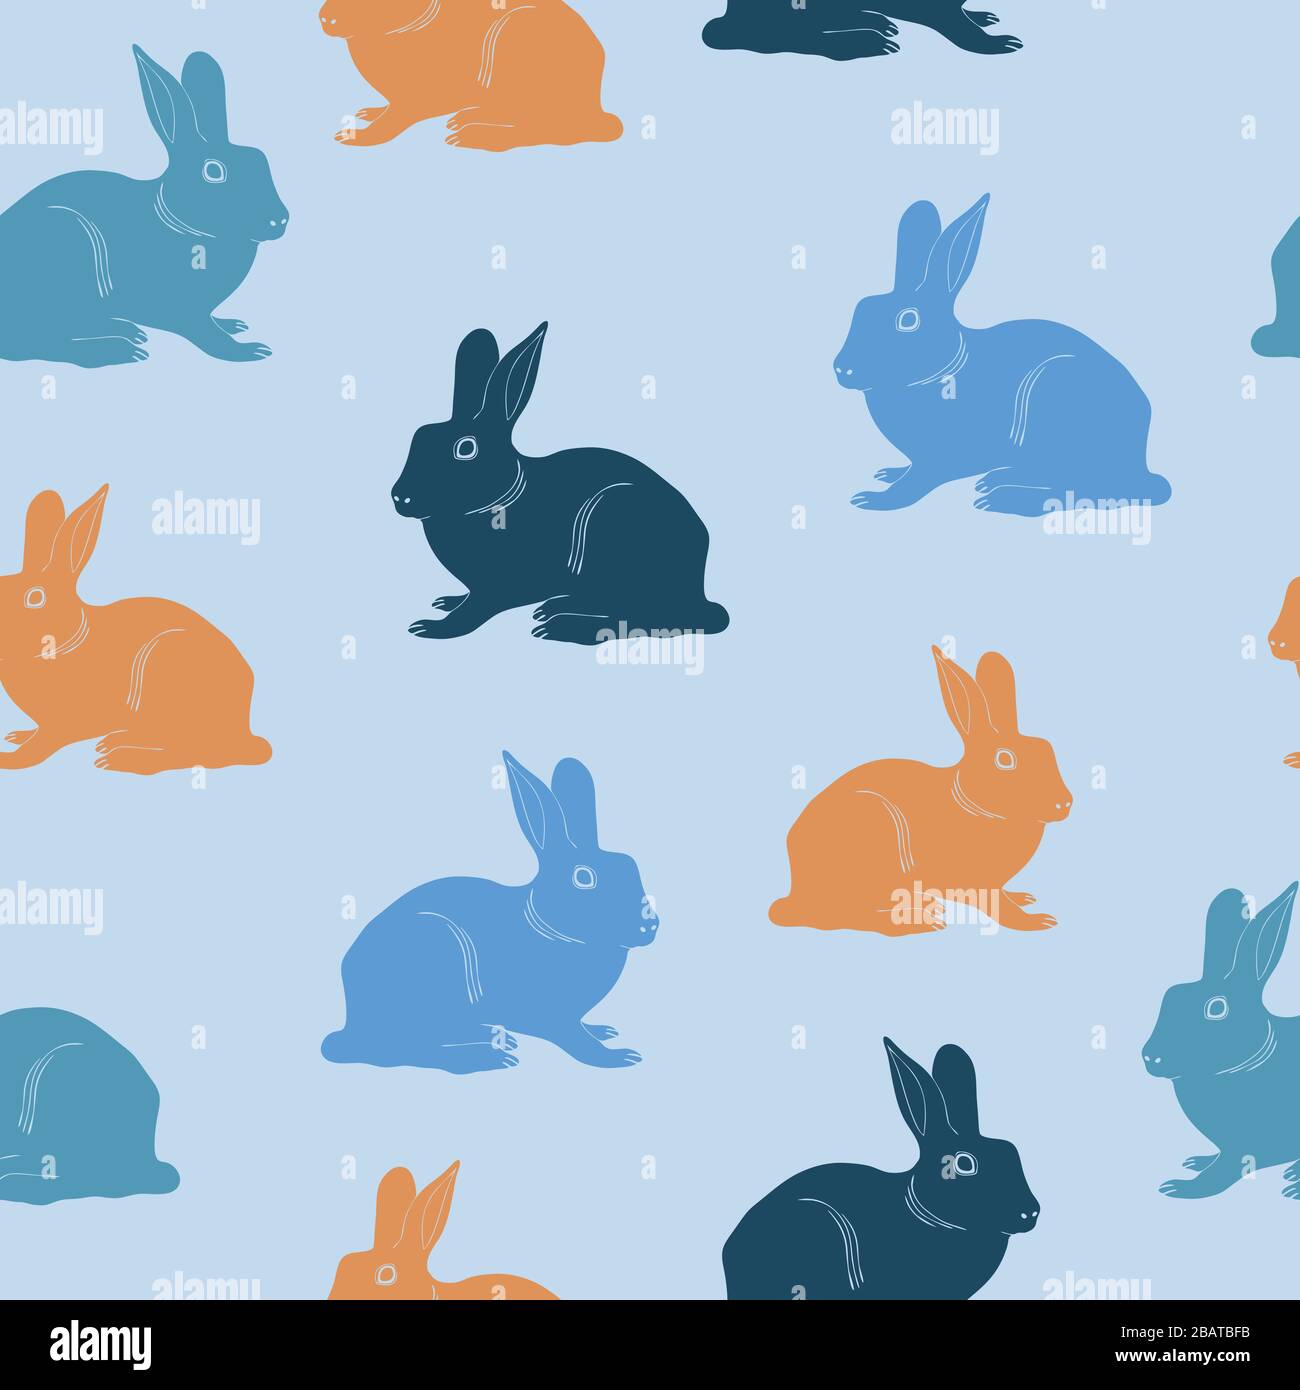 Shapes of rabbits in blue and orange on light background. Stock Vector